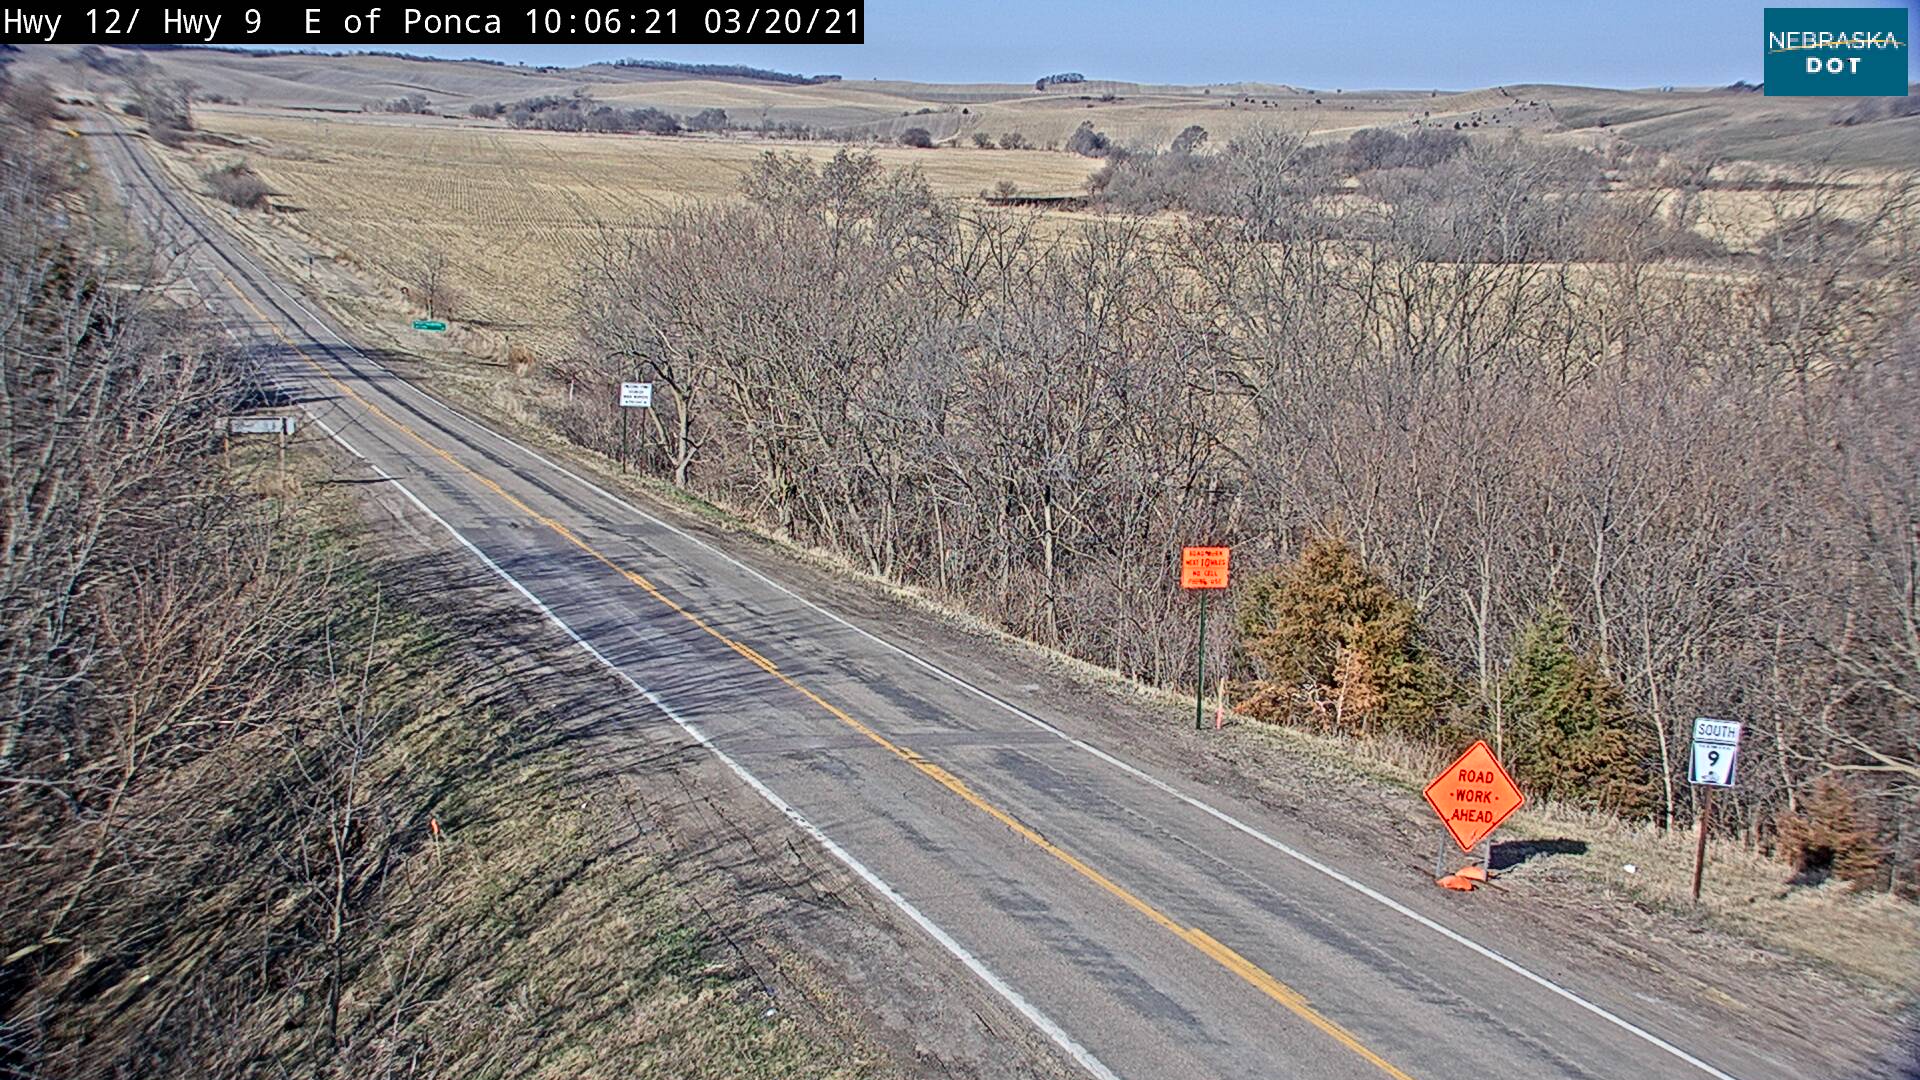 S of Ponca - 9 looking south  - NE 12 - USA